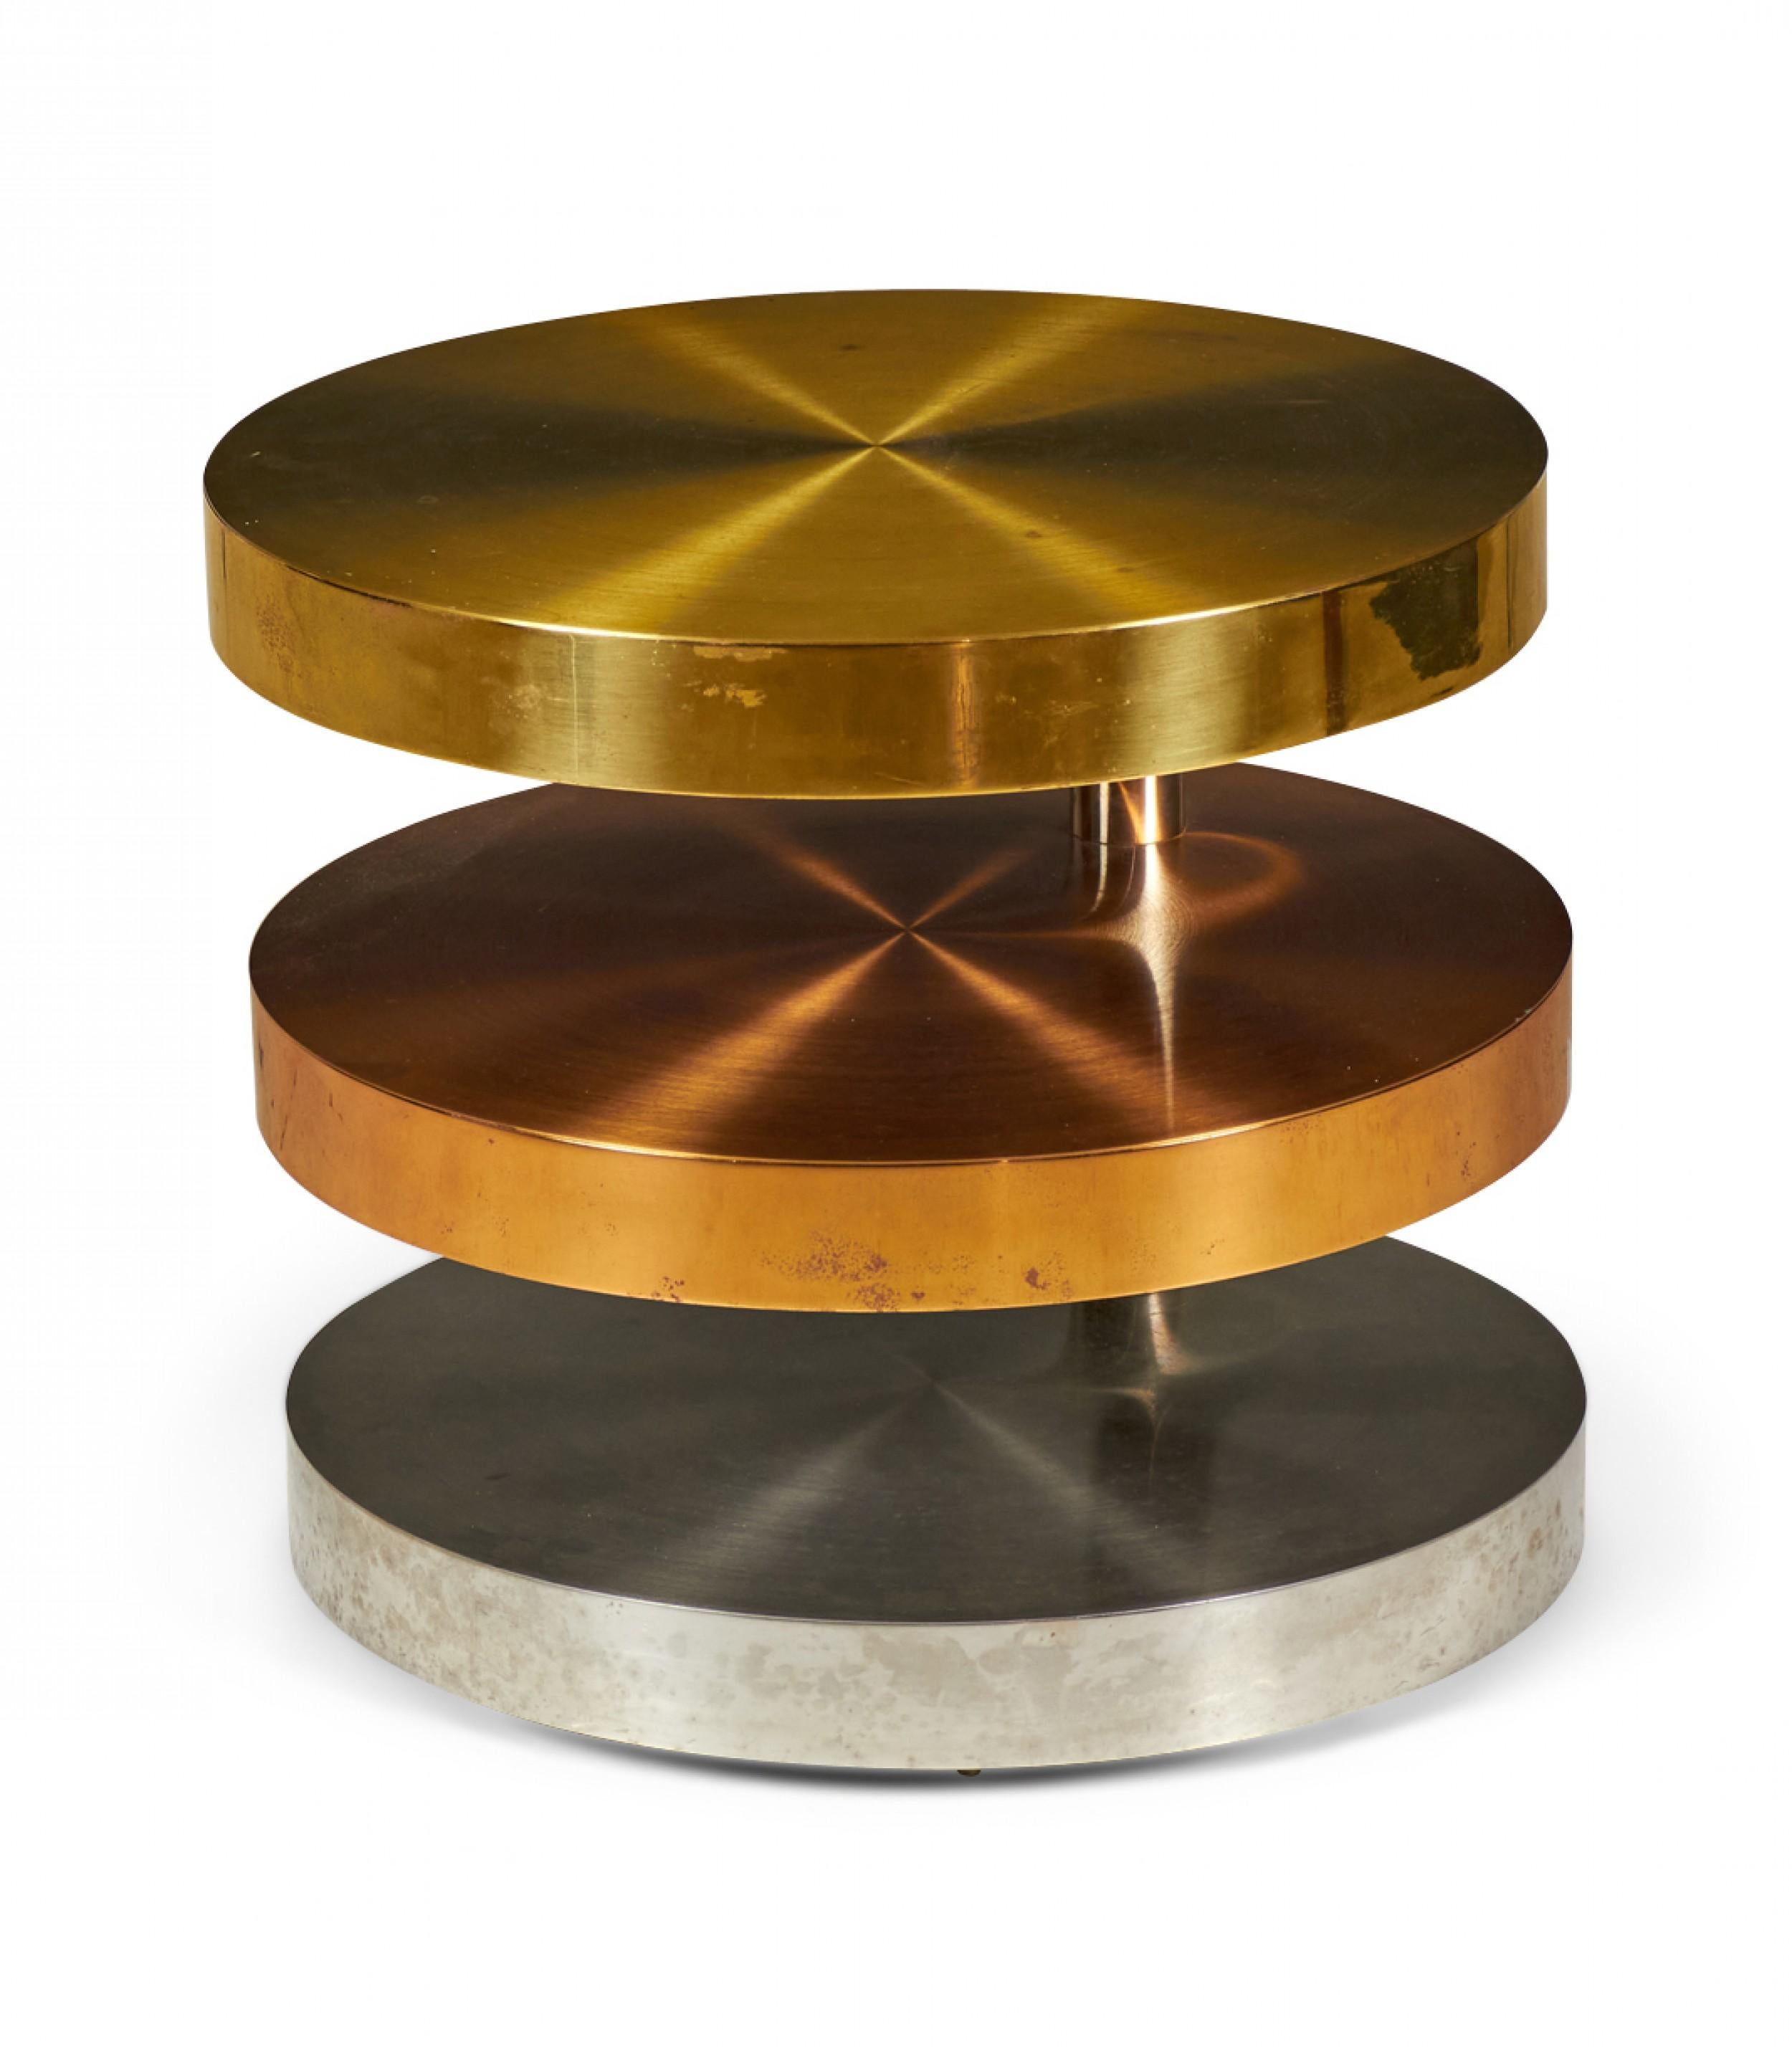 American High Style (circa 1980) coffee / cocktail table comprised of three swiveling circular tiers made from polished and satin brass, copper and chrome plated steel resting on rolling casters. (LORIN MARSH).
 